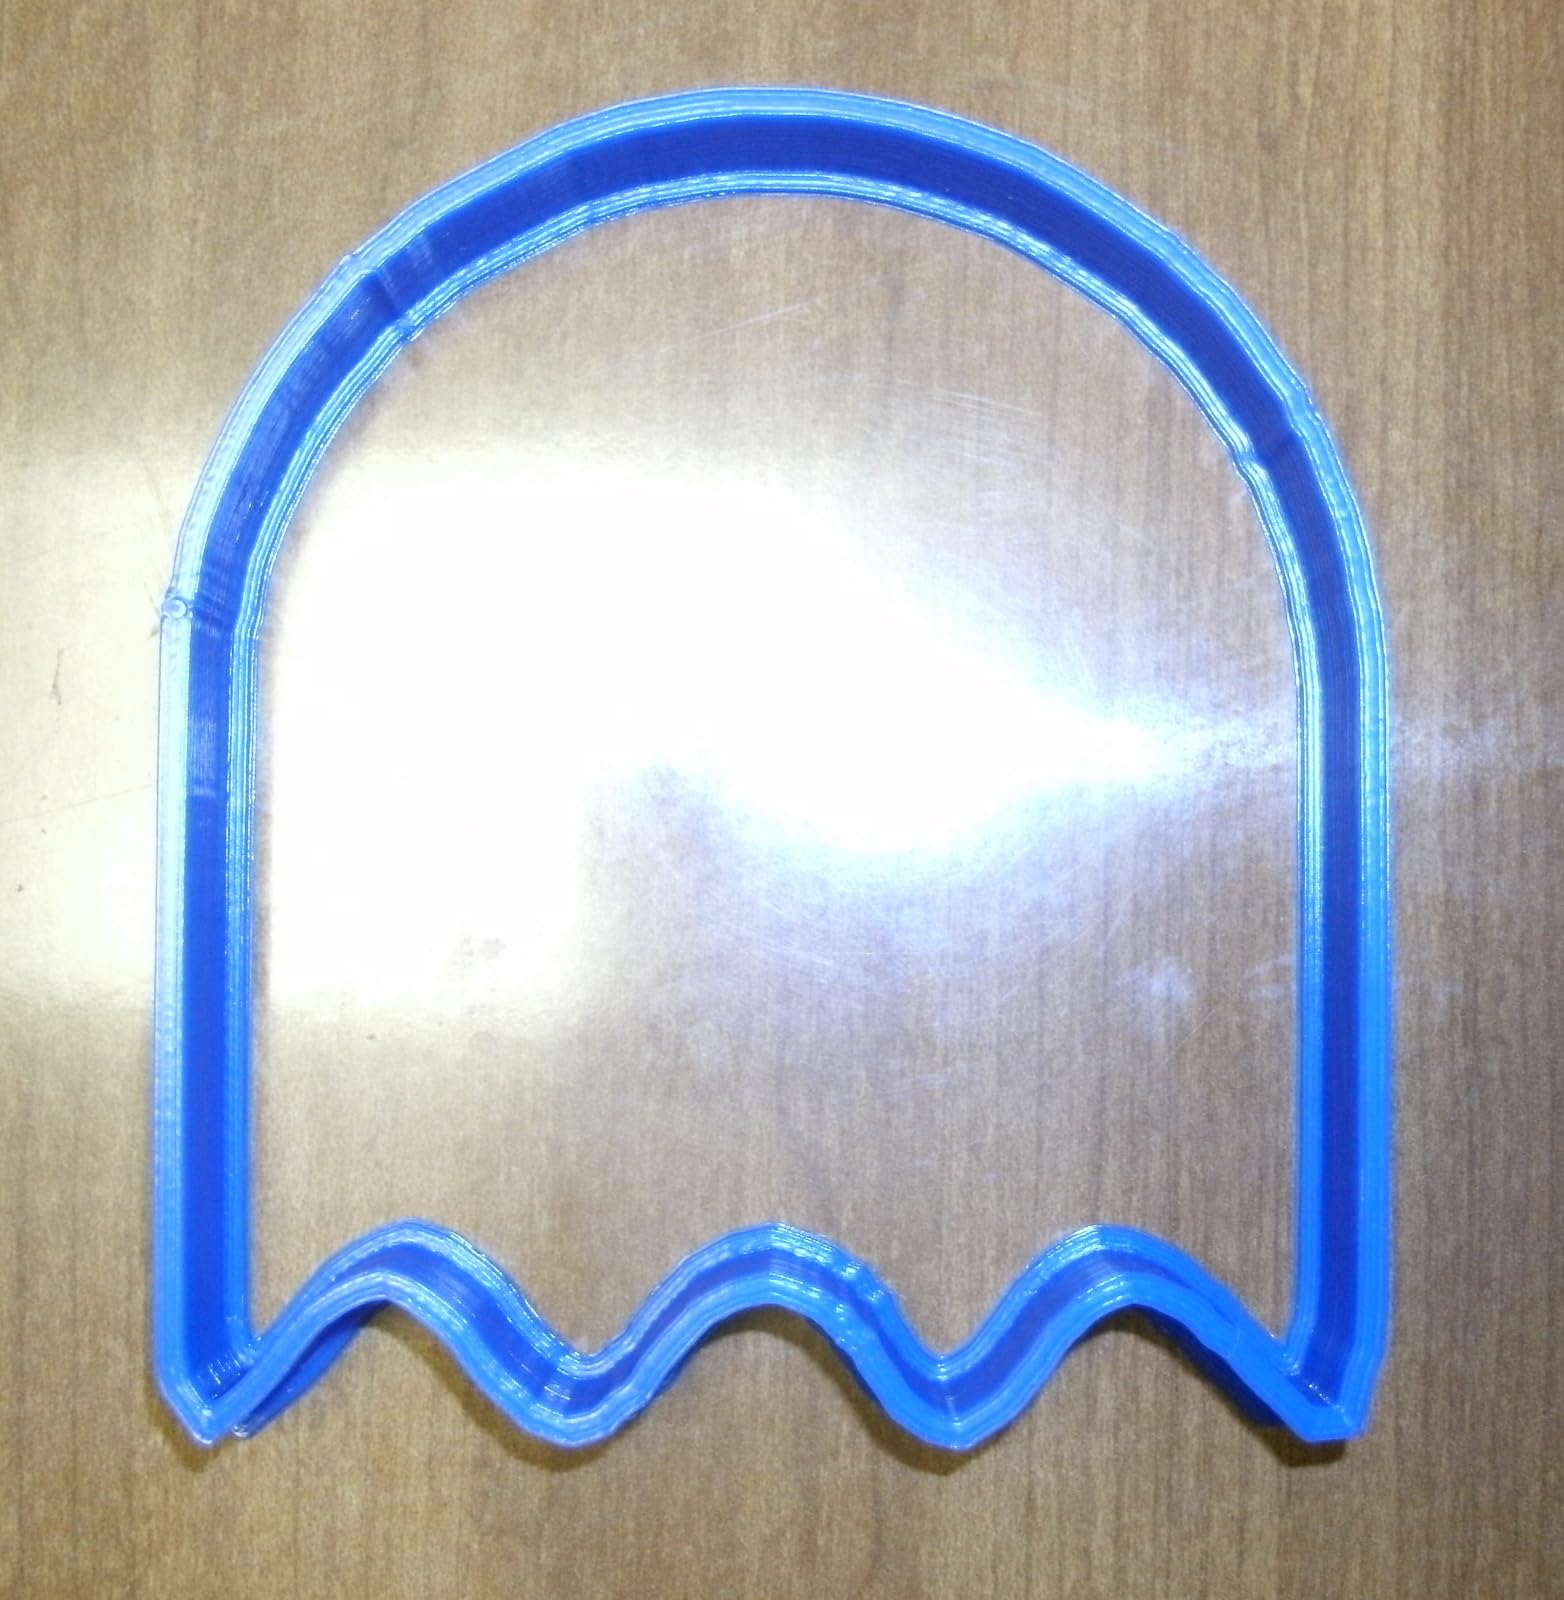 INSPIRED BY PACMAN GHOST VIDEO GAME ARCADE CHARACTER COOKIE CUTTER MADE IN USA PR496